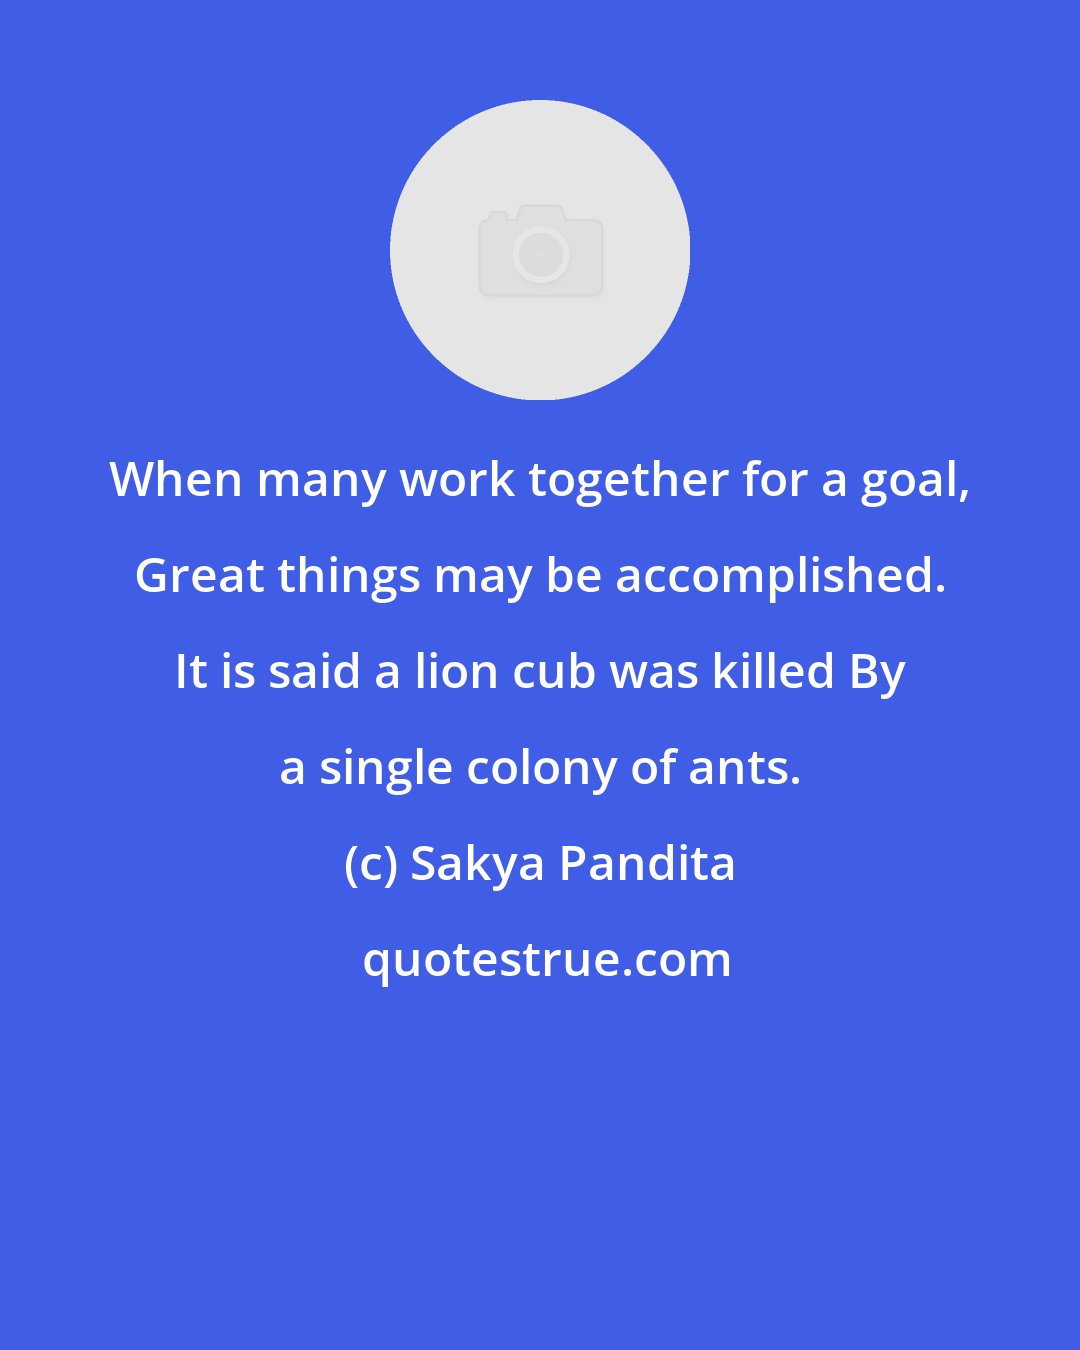 Sakya Pandita: When many work together for a goal, Great things may be accomplished. It is said a lion cub was killed By a single colony of ants.